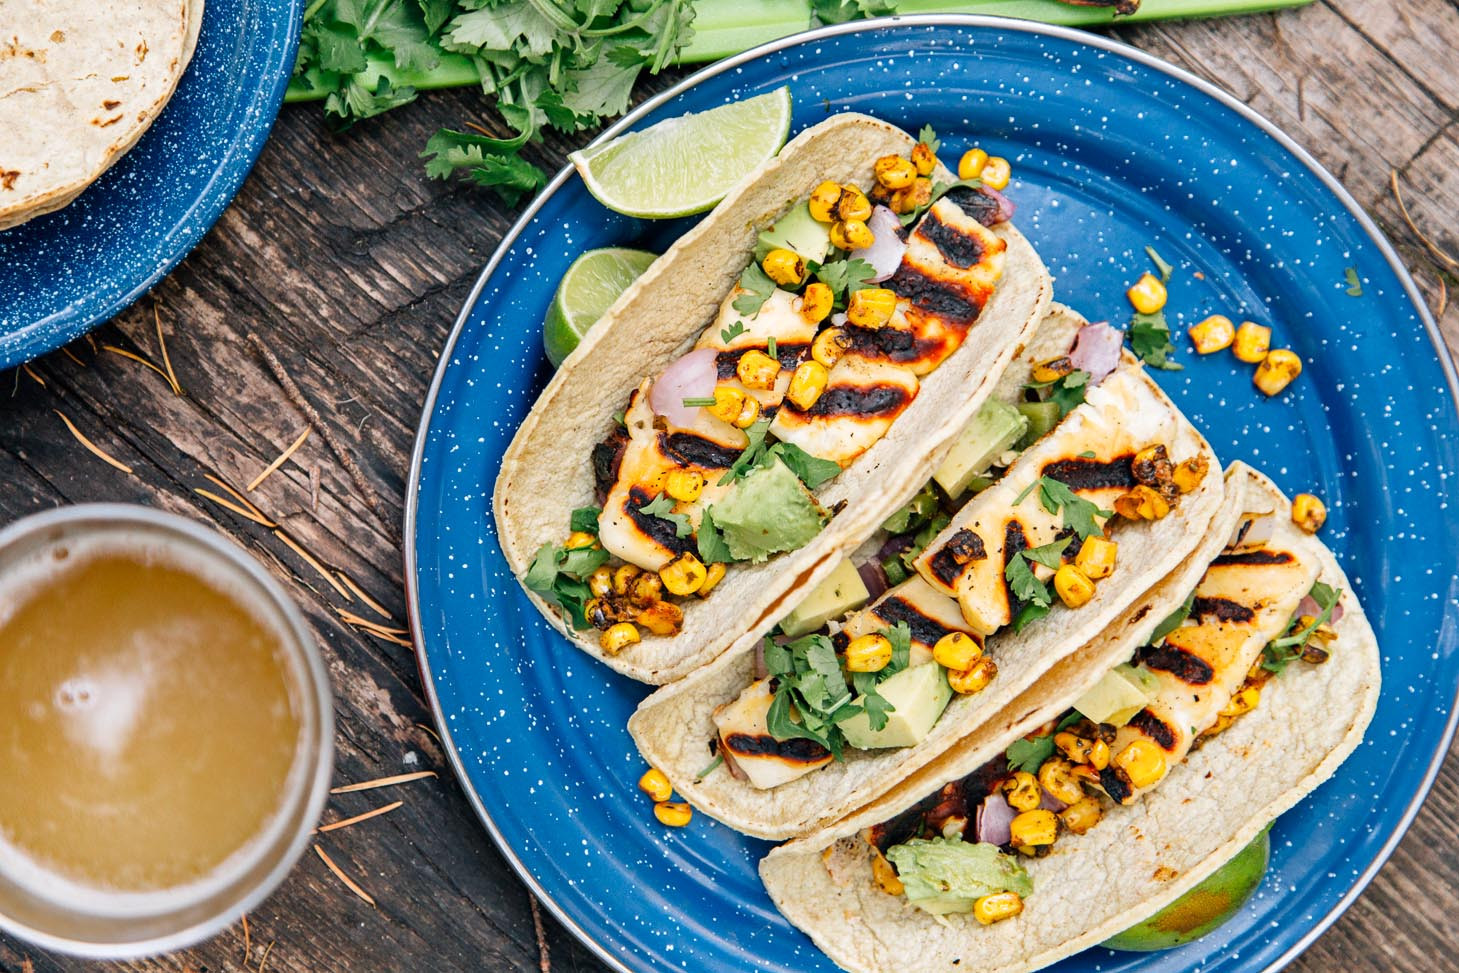 Easy Vegan Camping Meals
 Grilled Halloumi Tacos